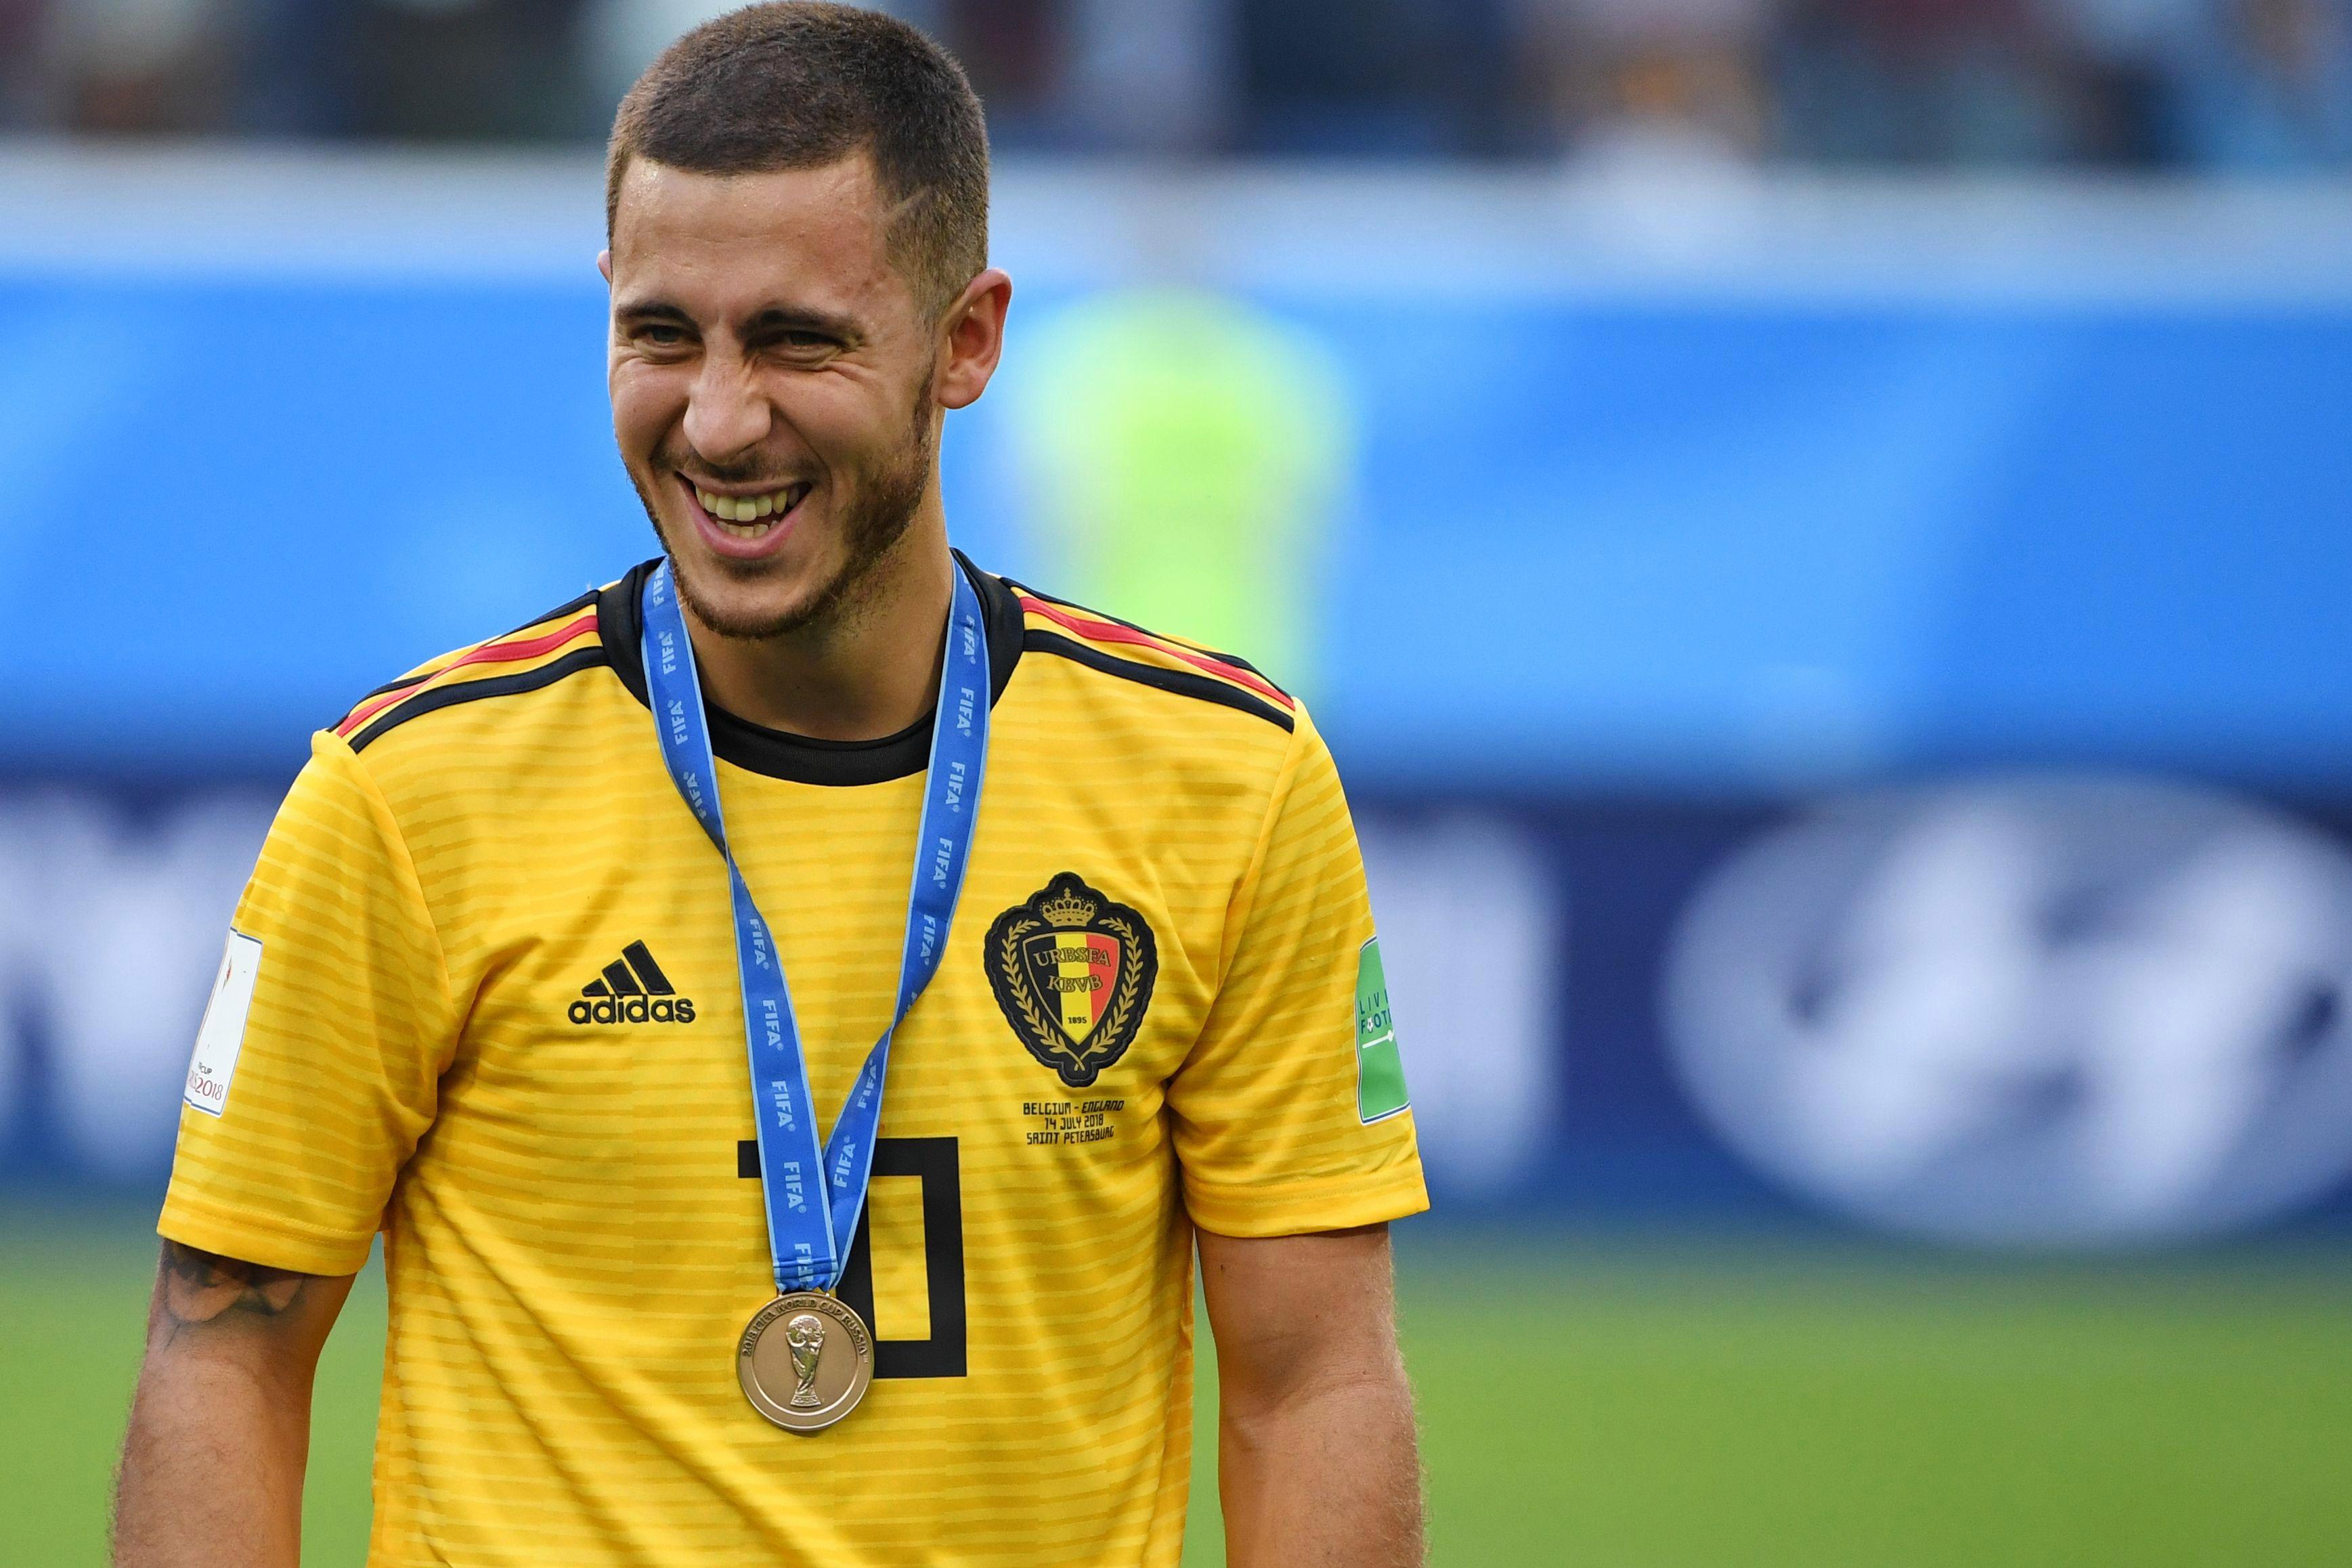 'You know my preferred destination' - Eden Hazard 'ready to leave Chelsea' amid interest from Real Madrid